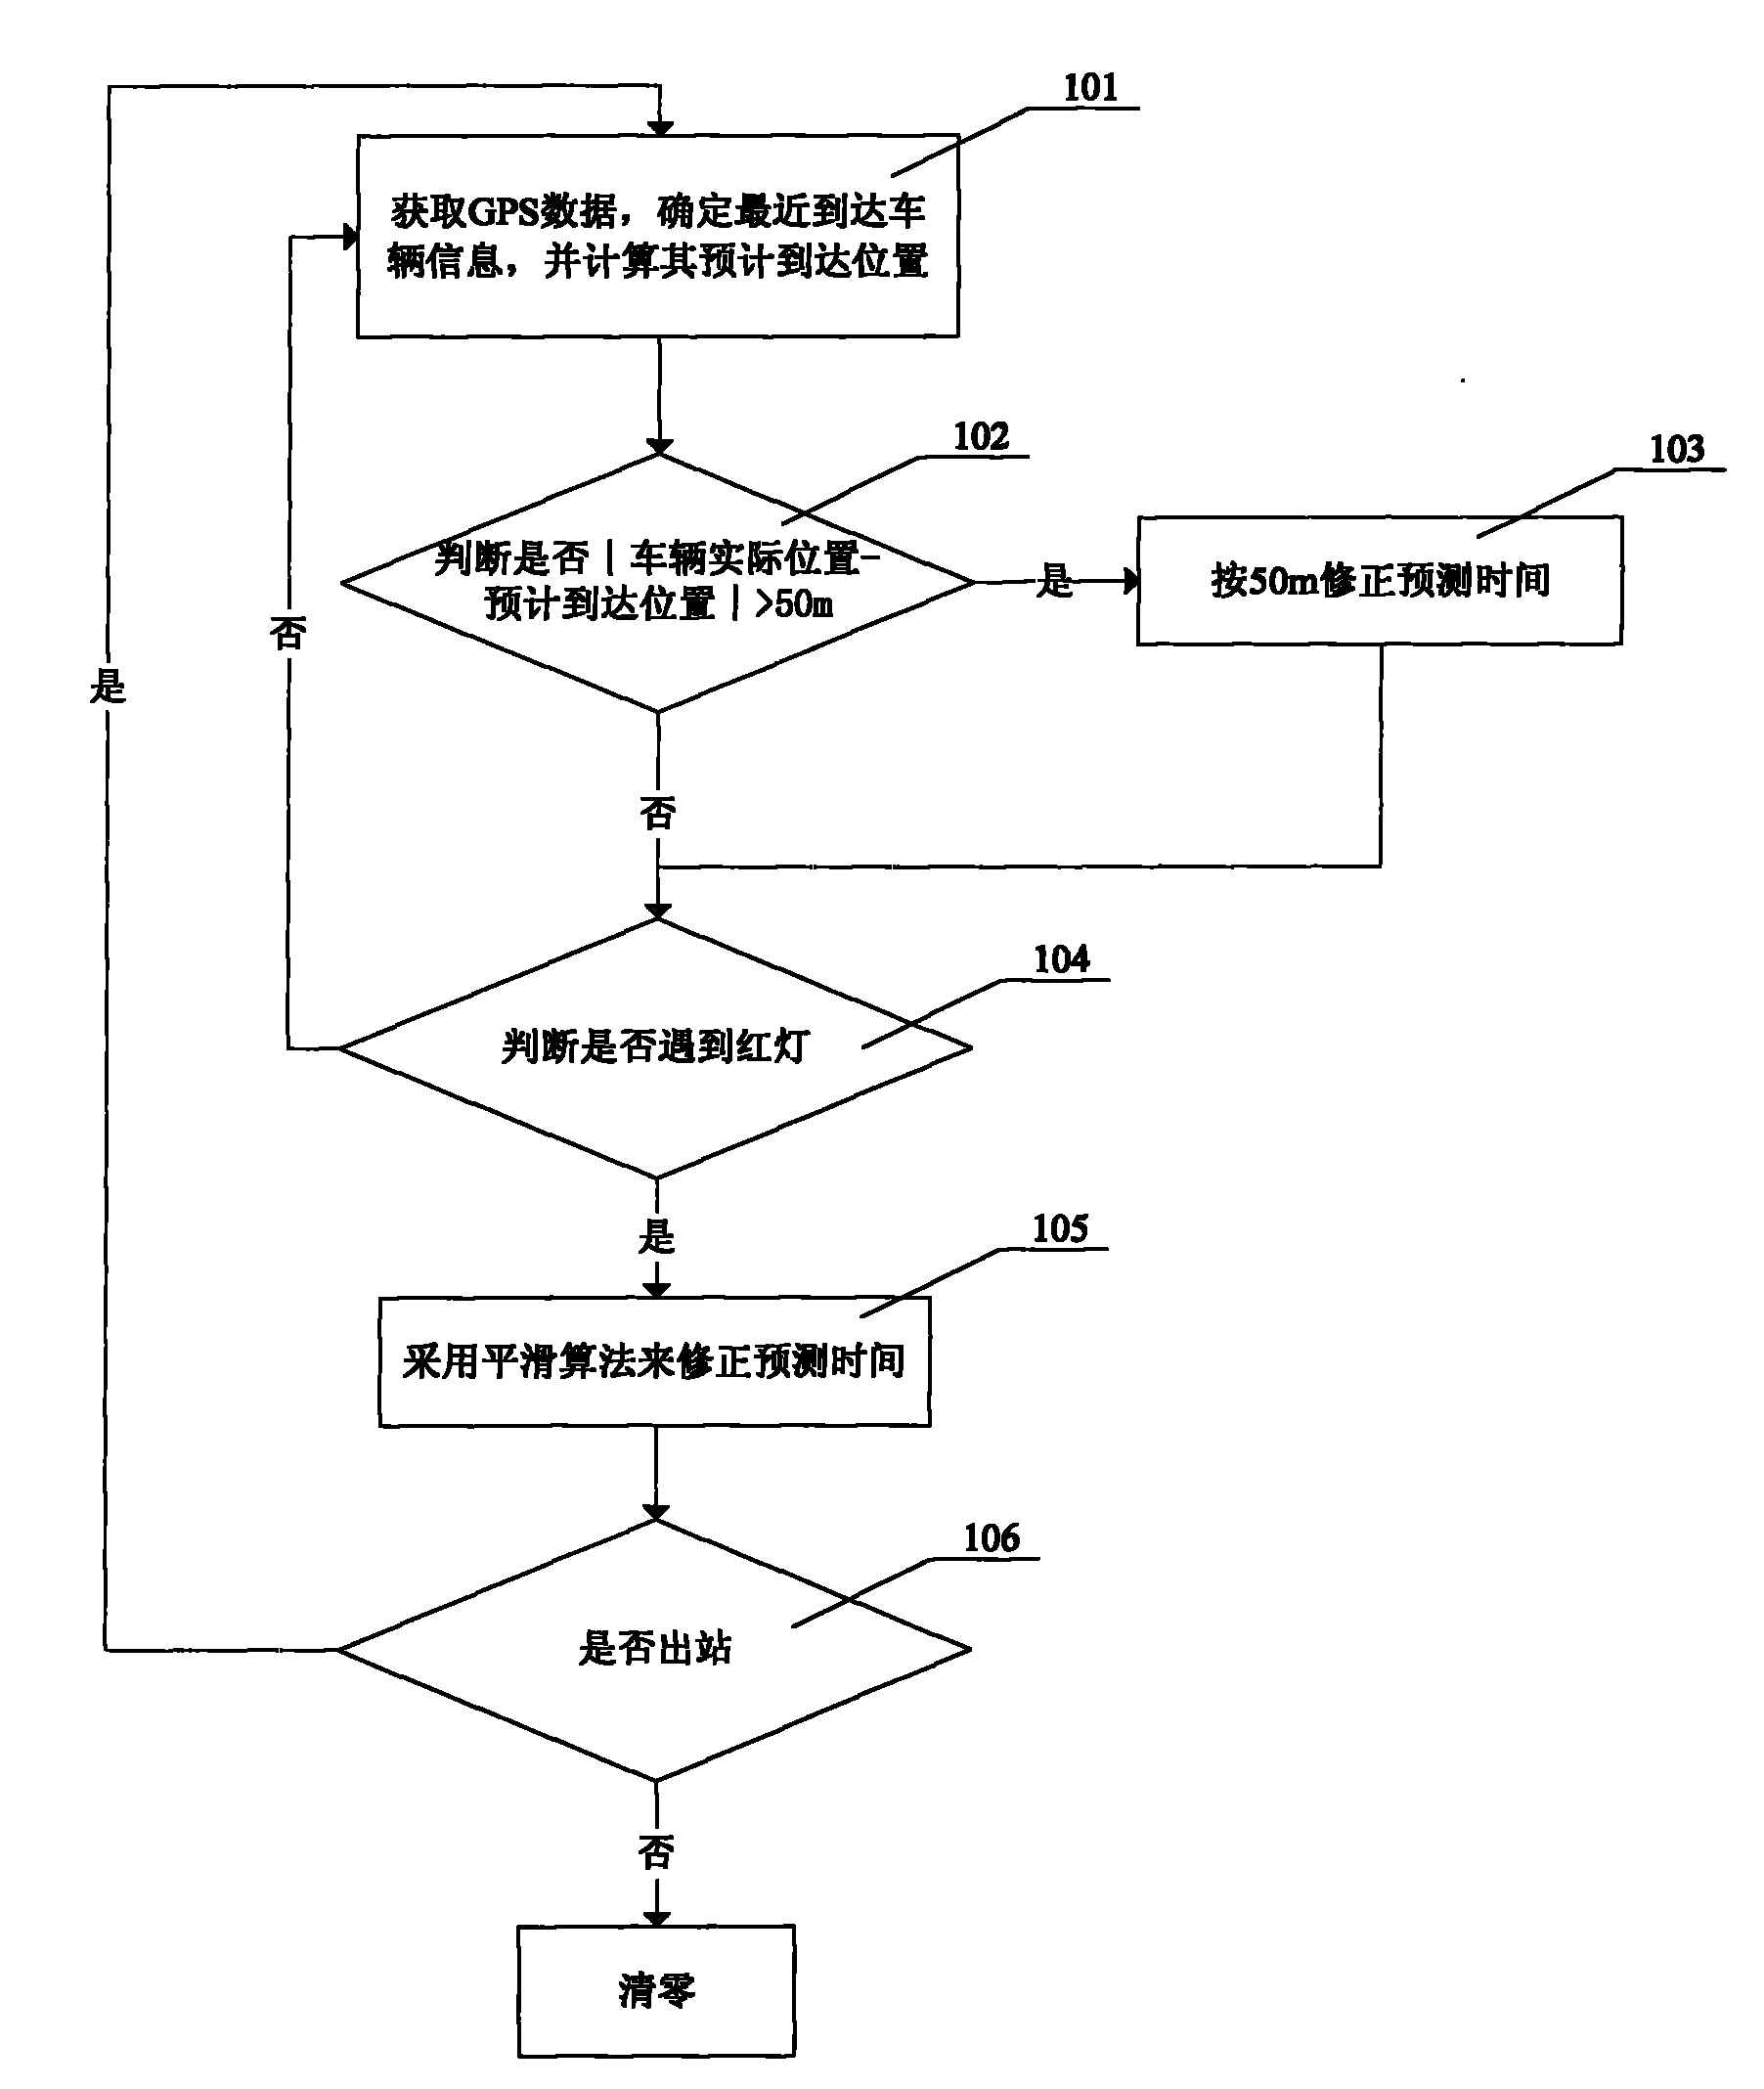 Control method of bus arrival time prediction model